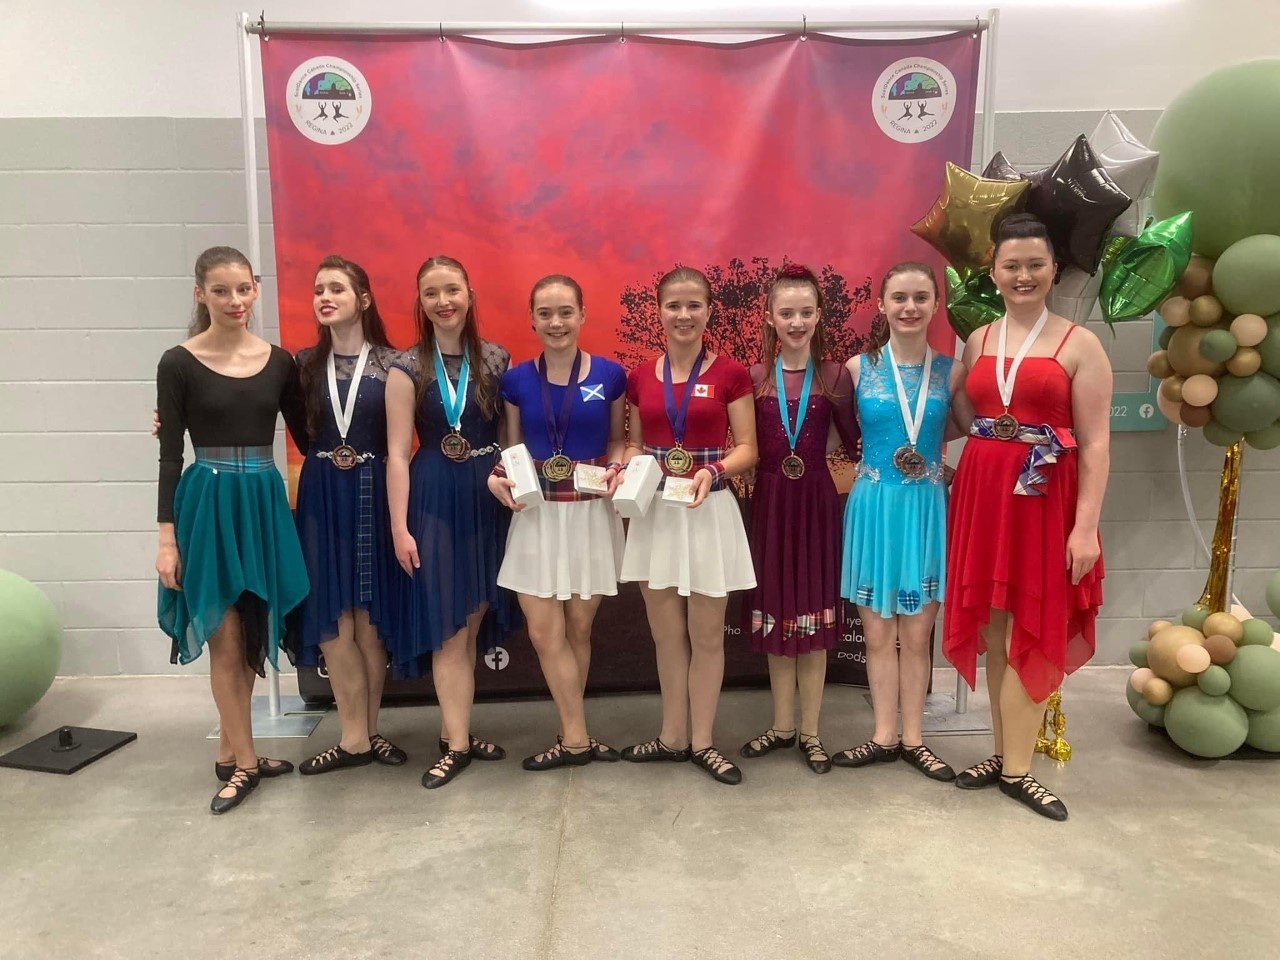 The Margaret Rose School of Dance pupils who won 75 medals at the ScotDance event